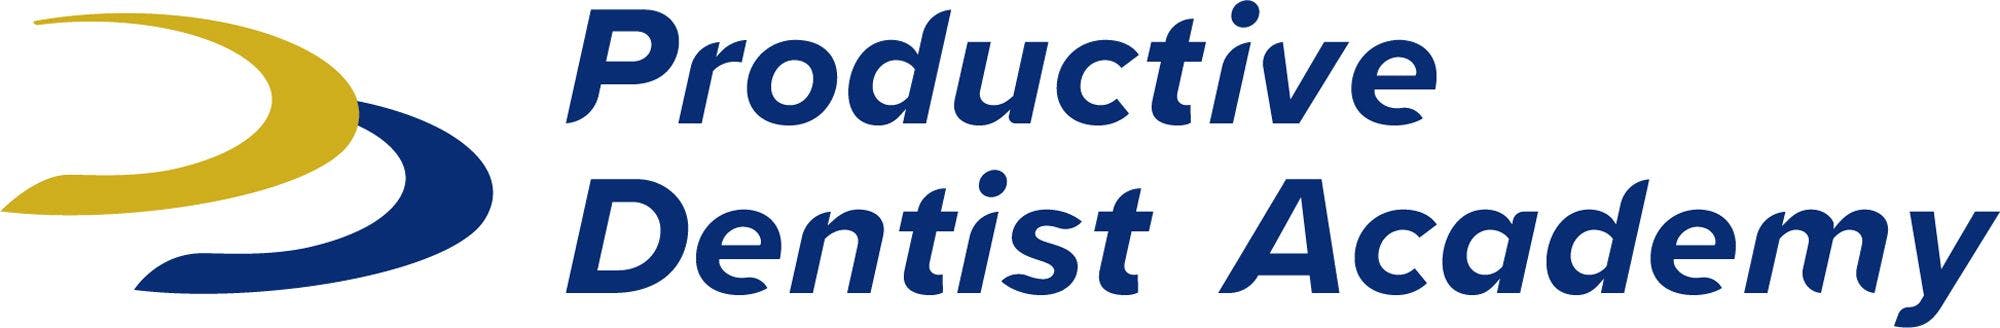 Productive Dentist Academy Introduces Investment Grade Practices to the Dental Industry